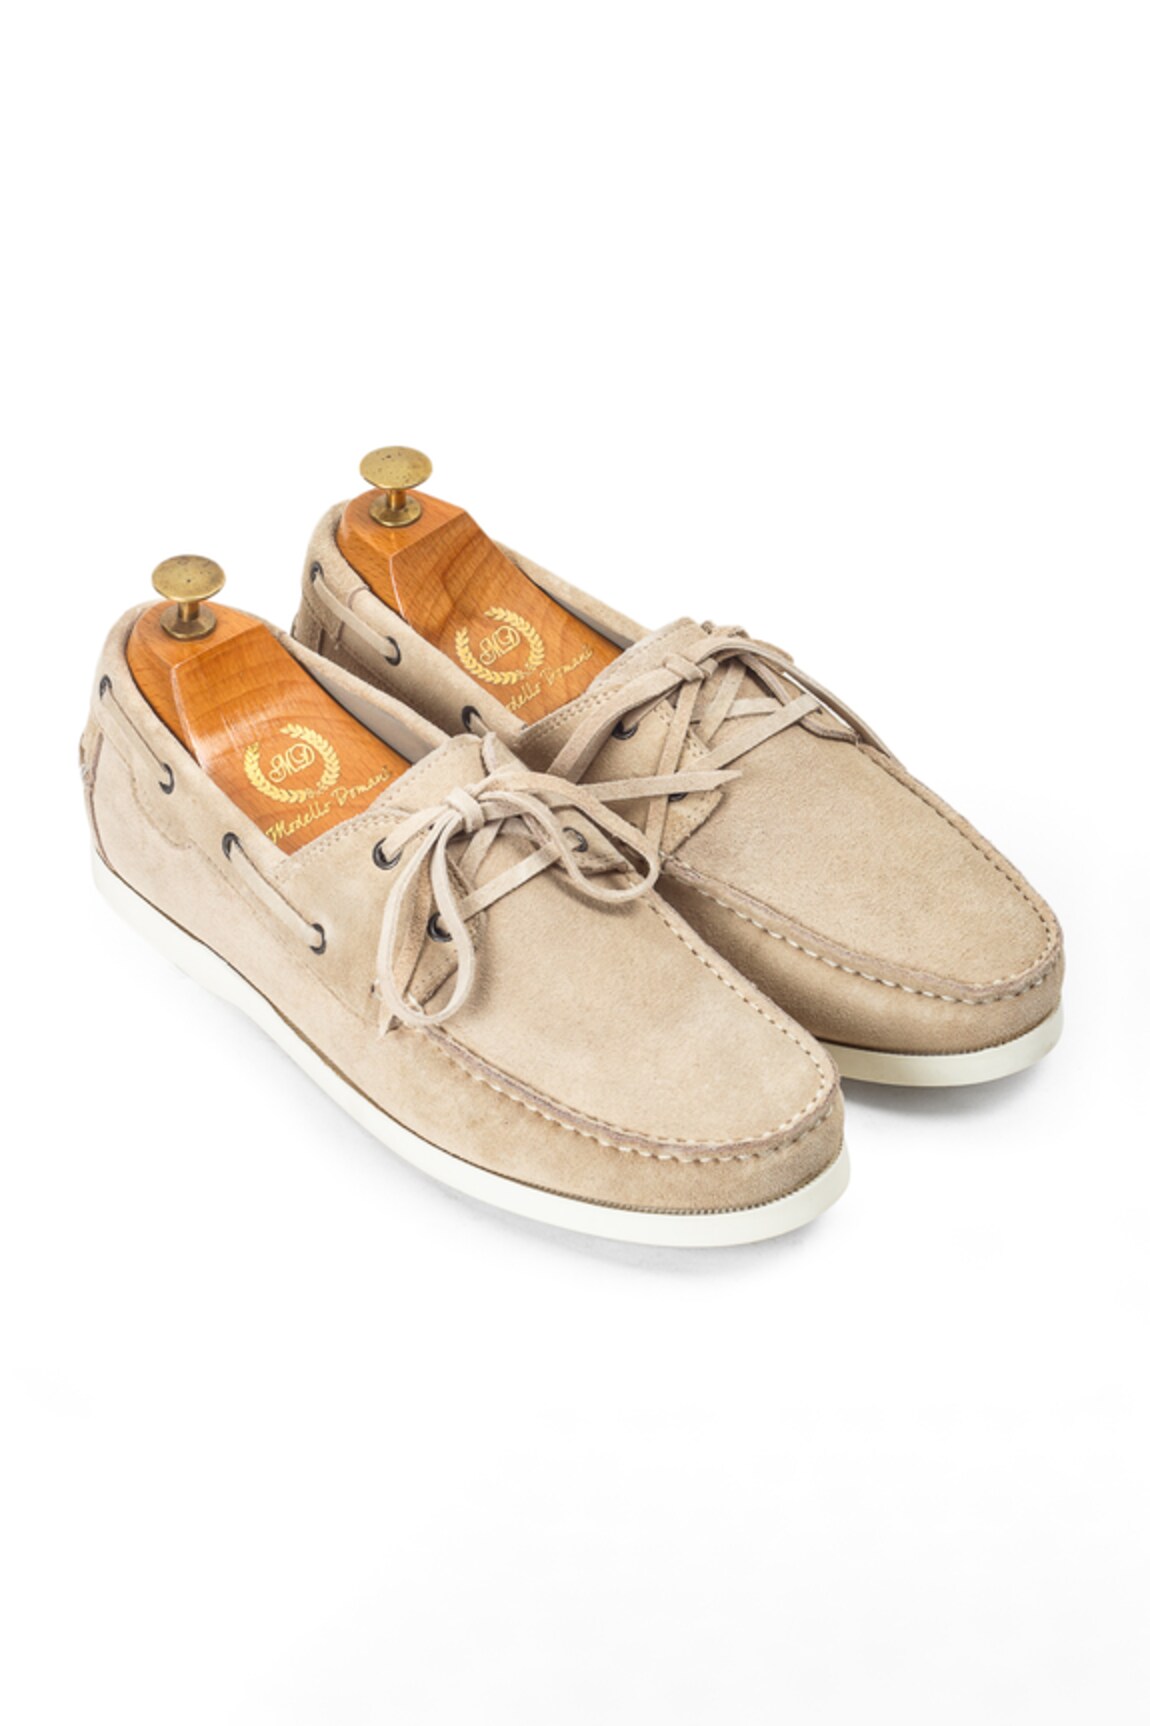 Domani Lucia Leather & Suede Boat Shoes